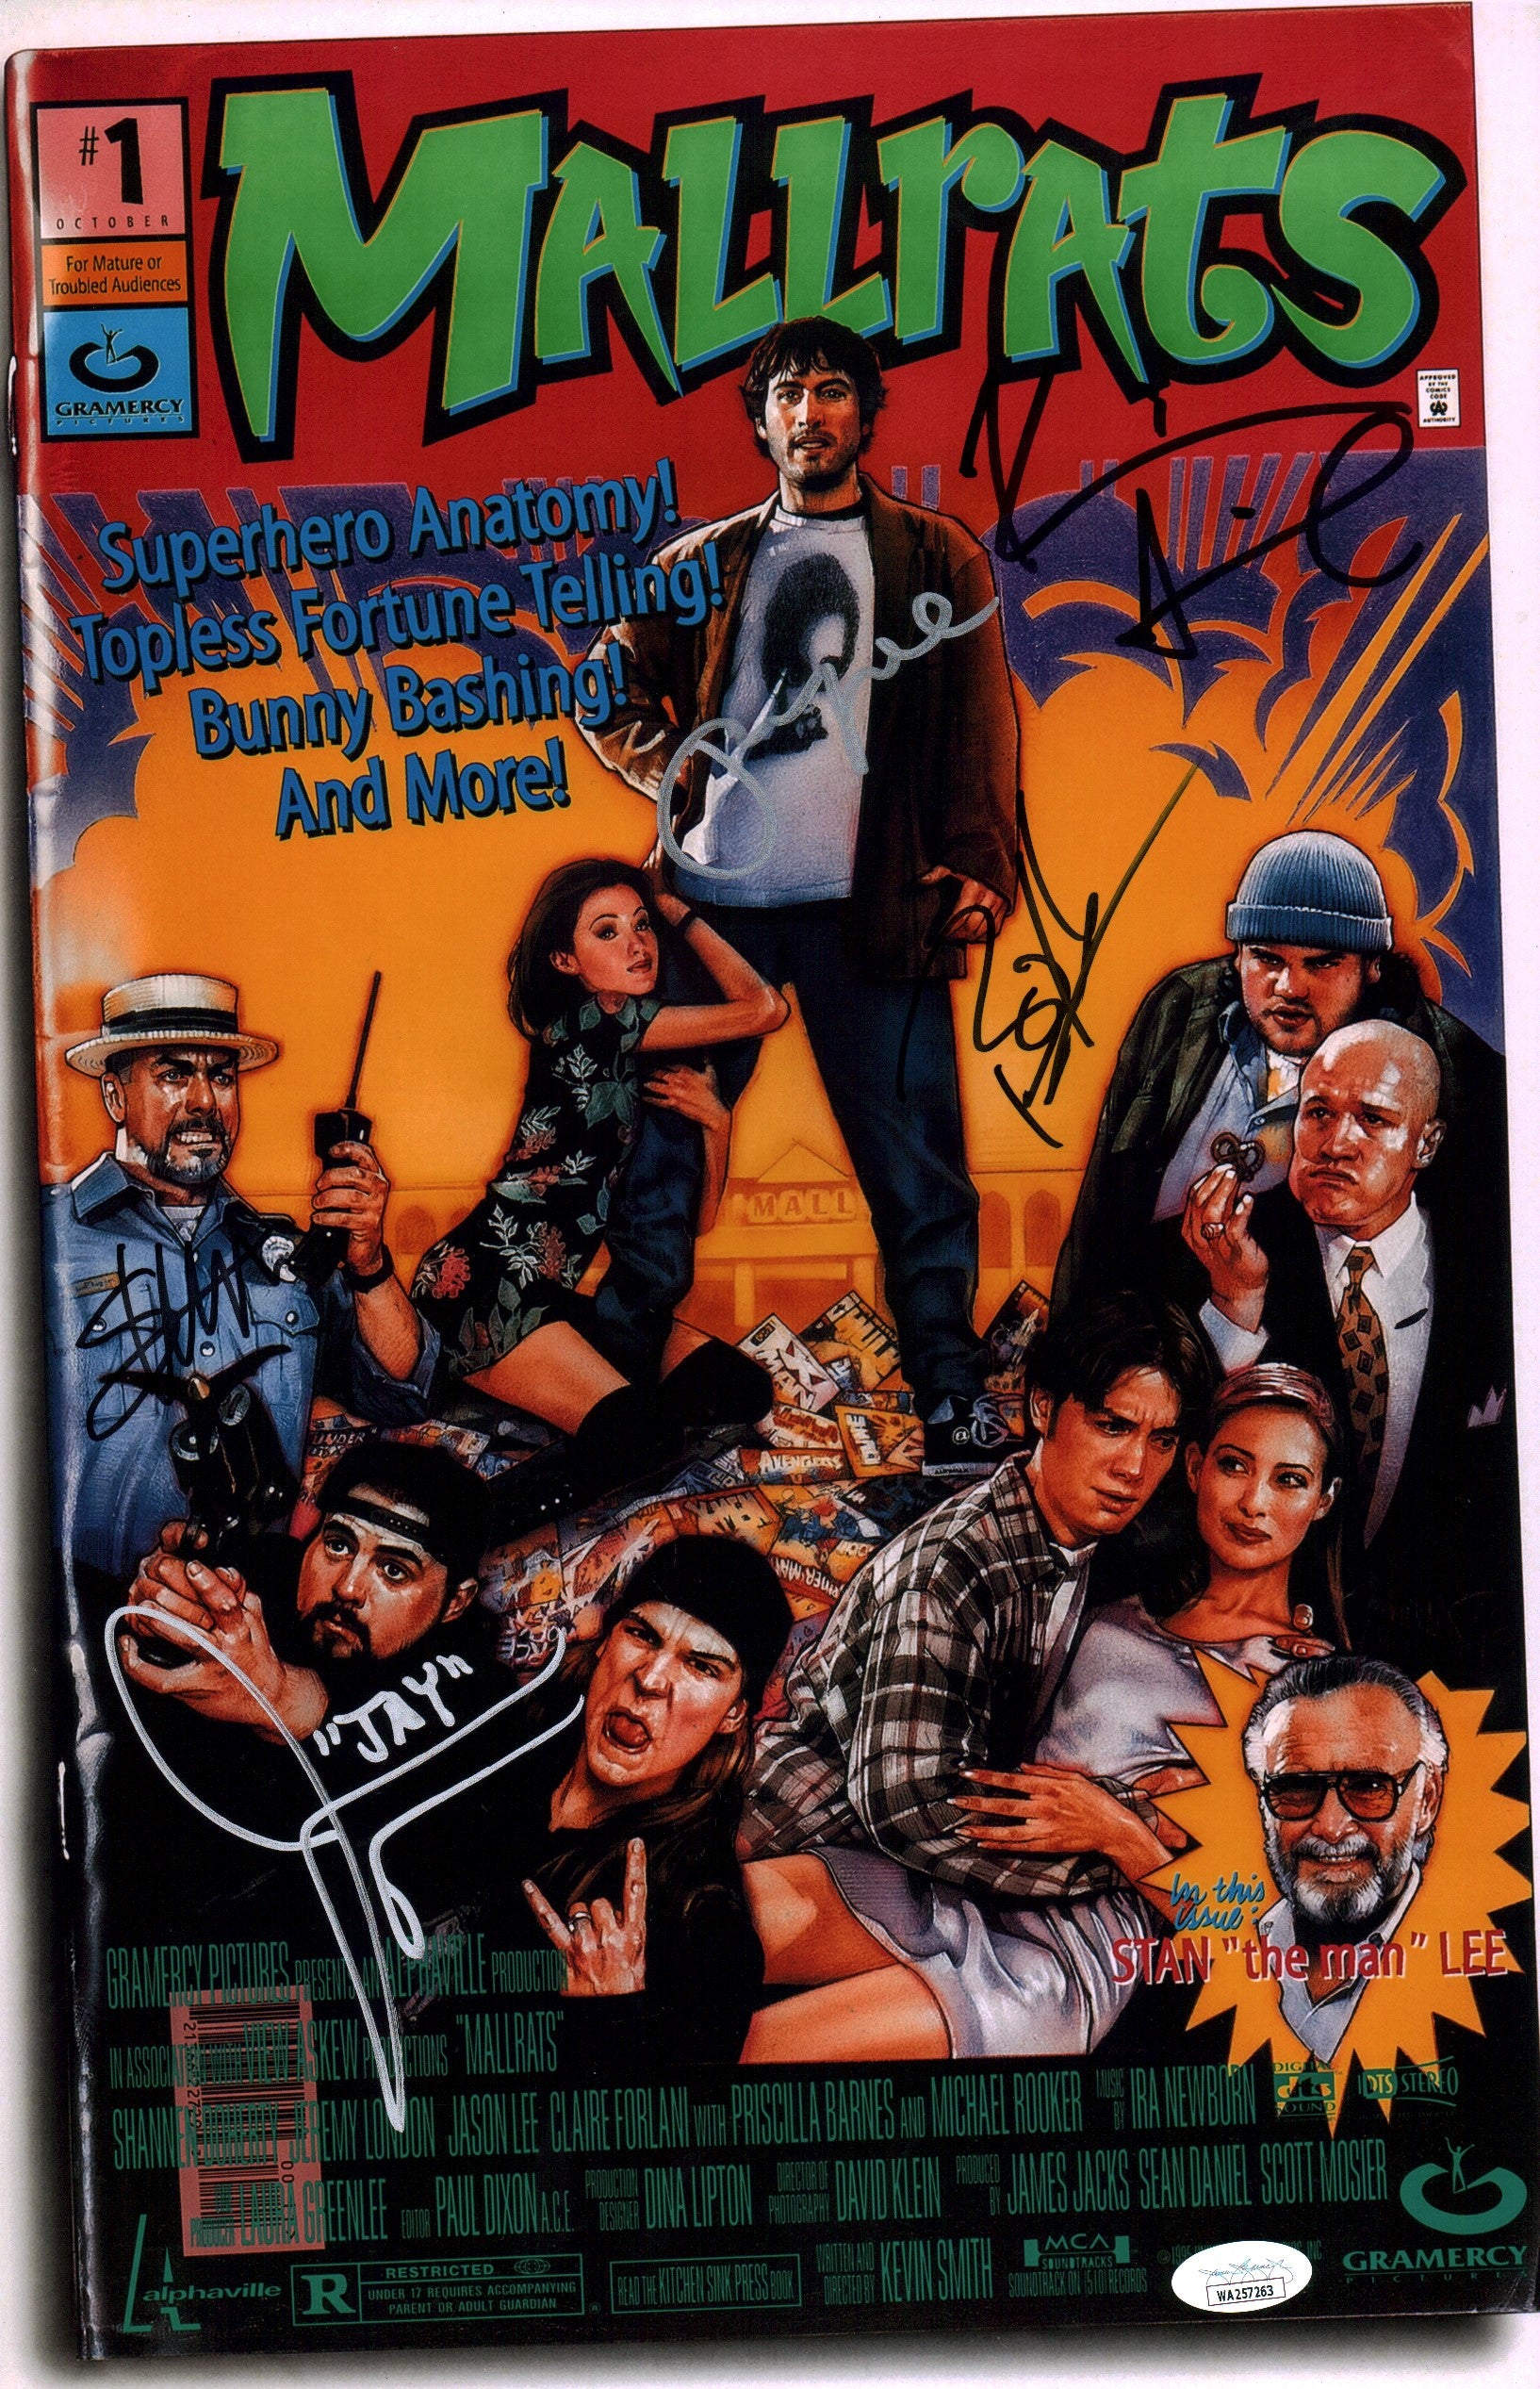 Mallrats 11x17 Signed Photo Poster Cast x5 Lee Mewes O'Halloran Smith Thorson JSA Certified Autograph